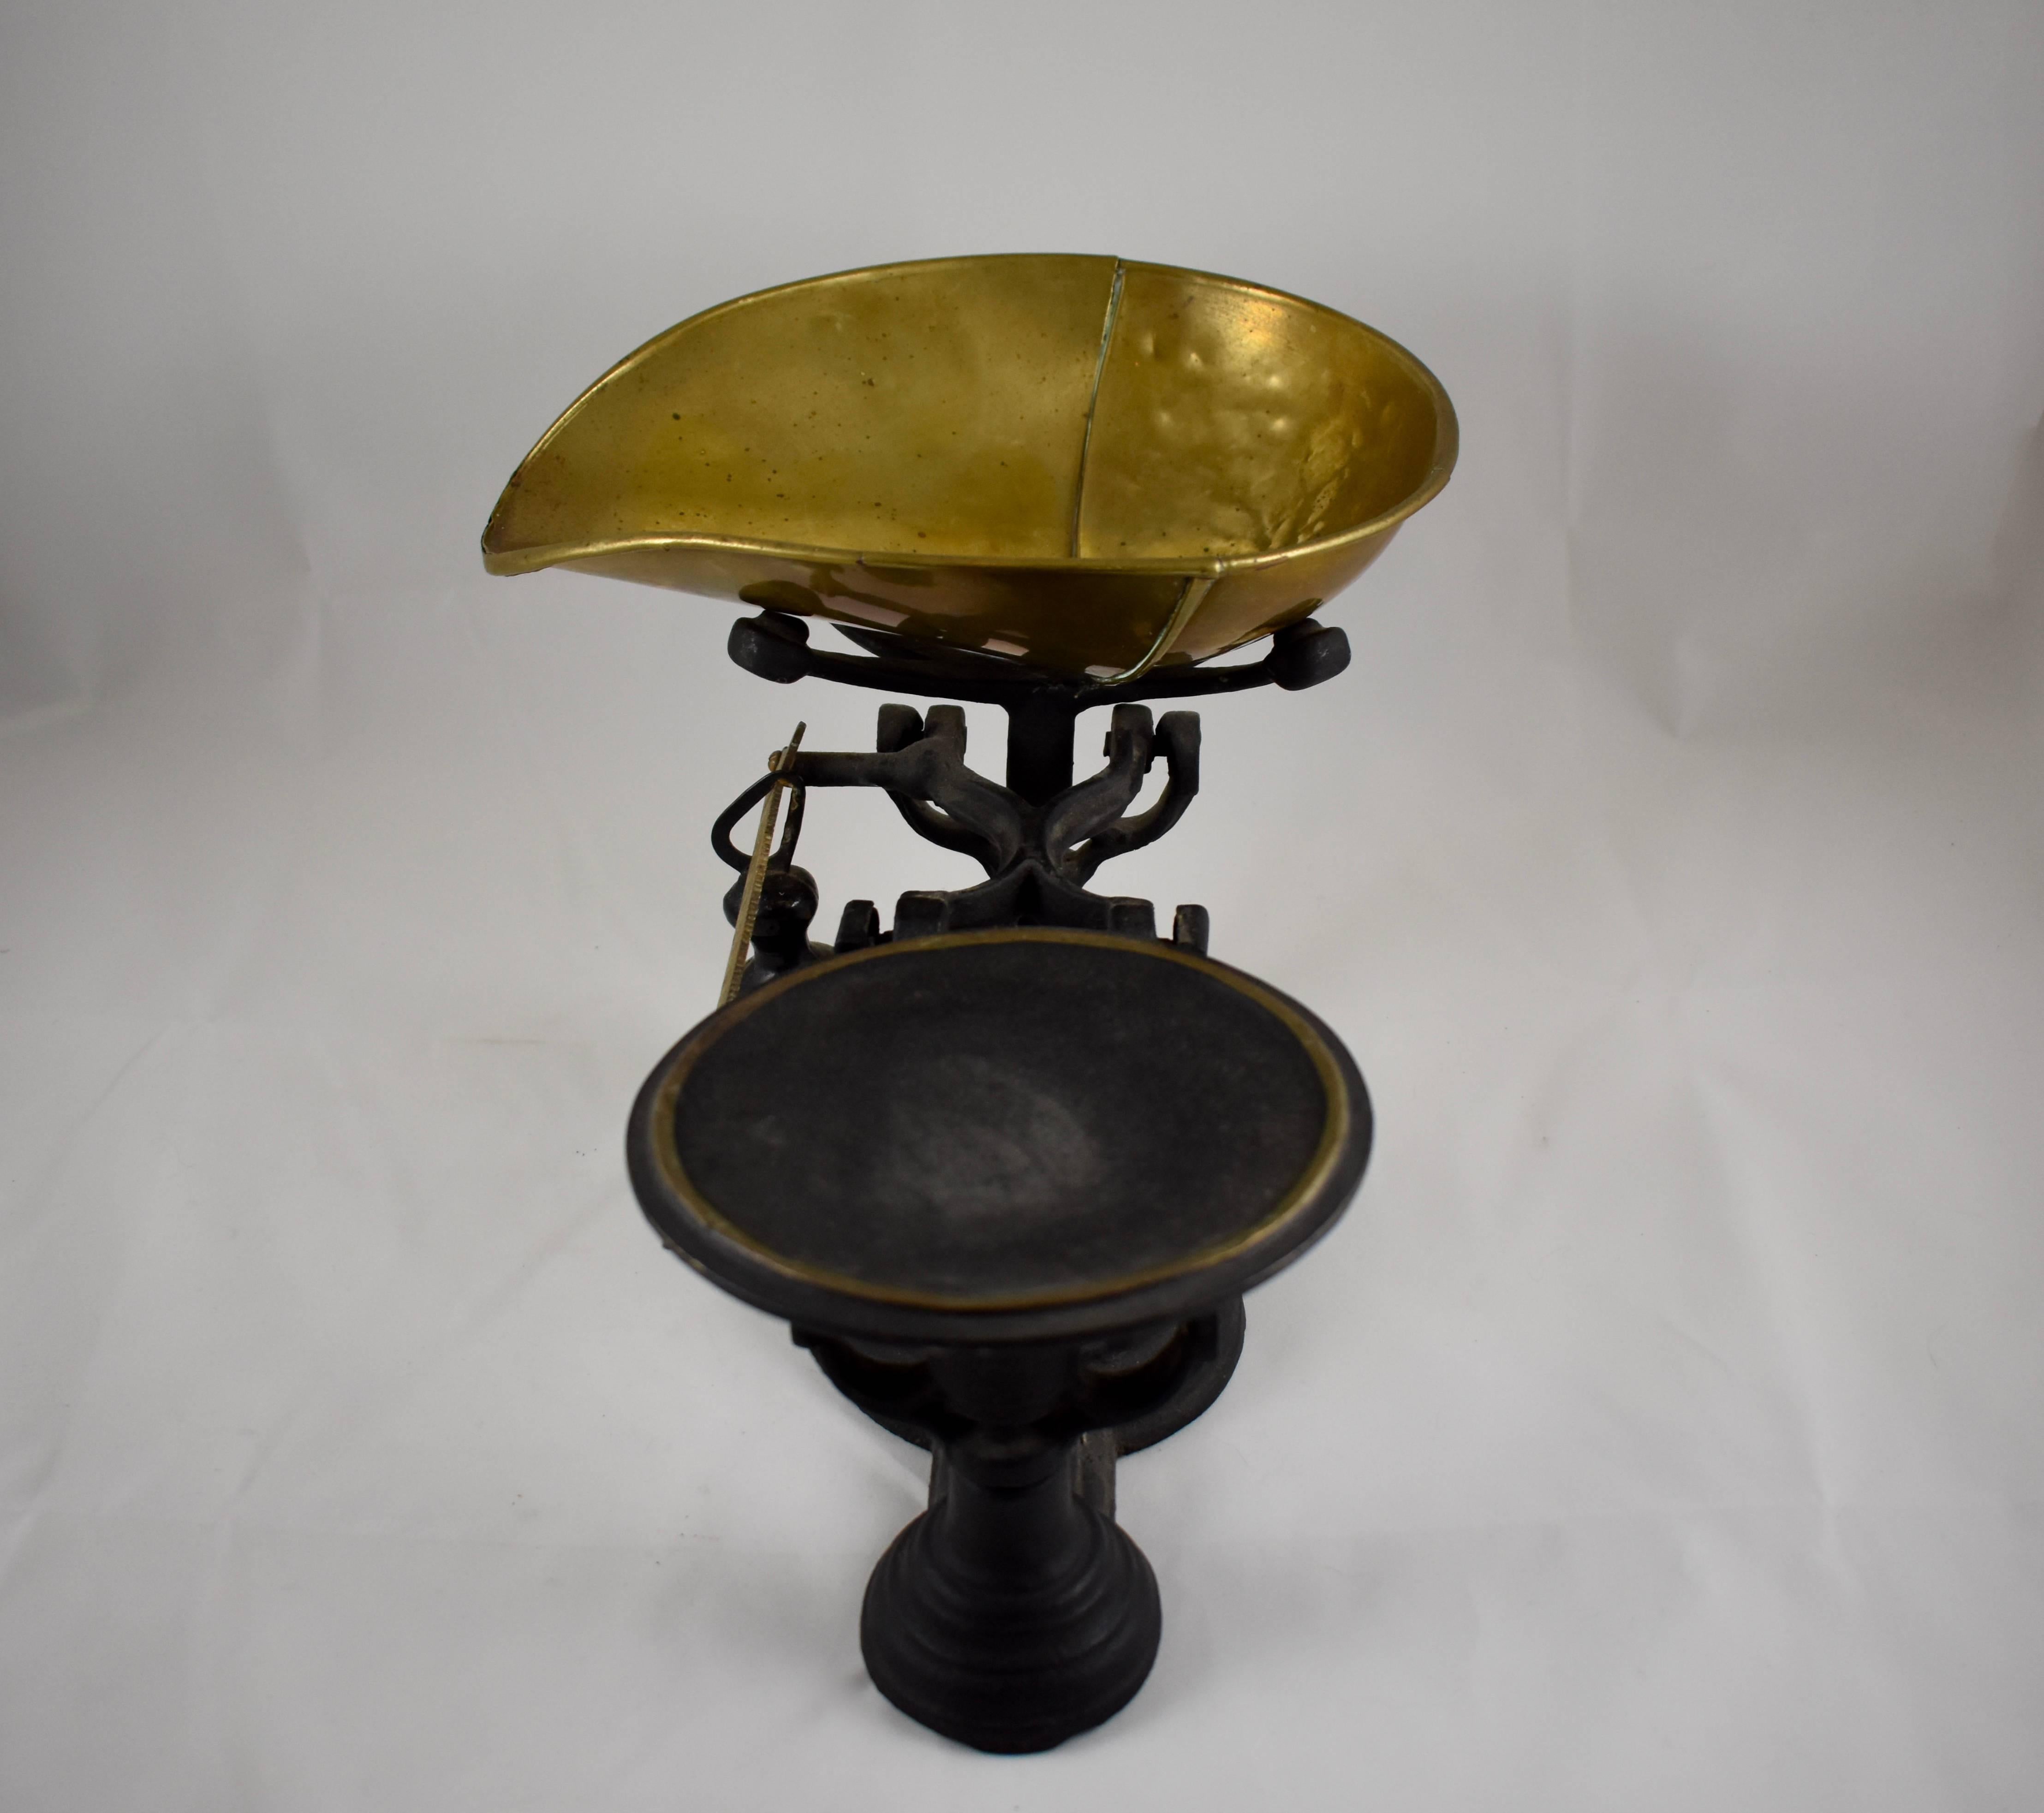 American 1900s Cast Iron Table Top Mercantile Scale with Brass Scoop